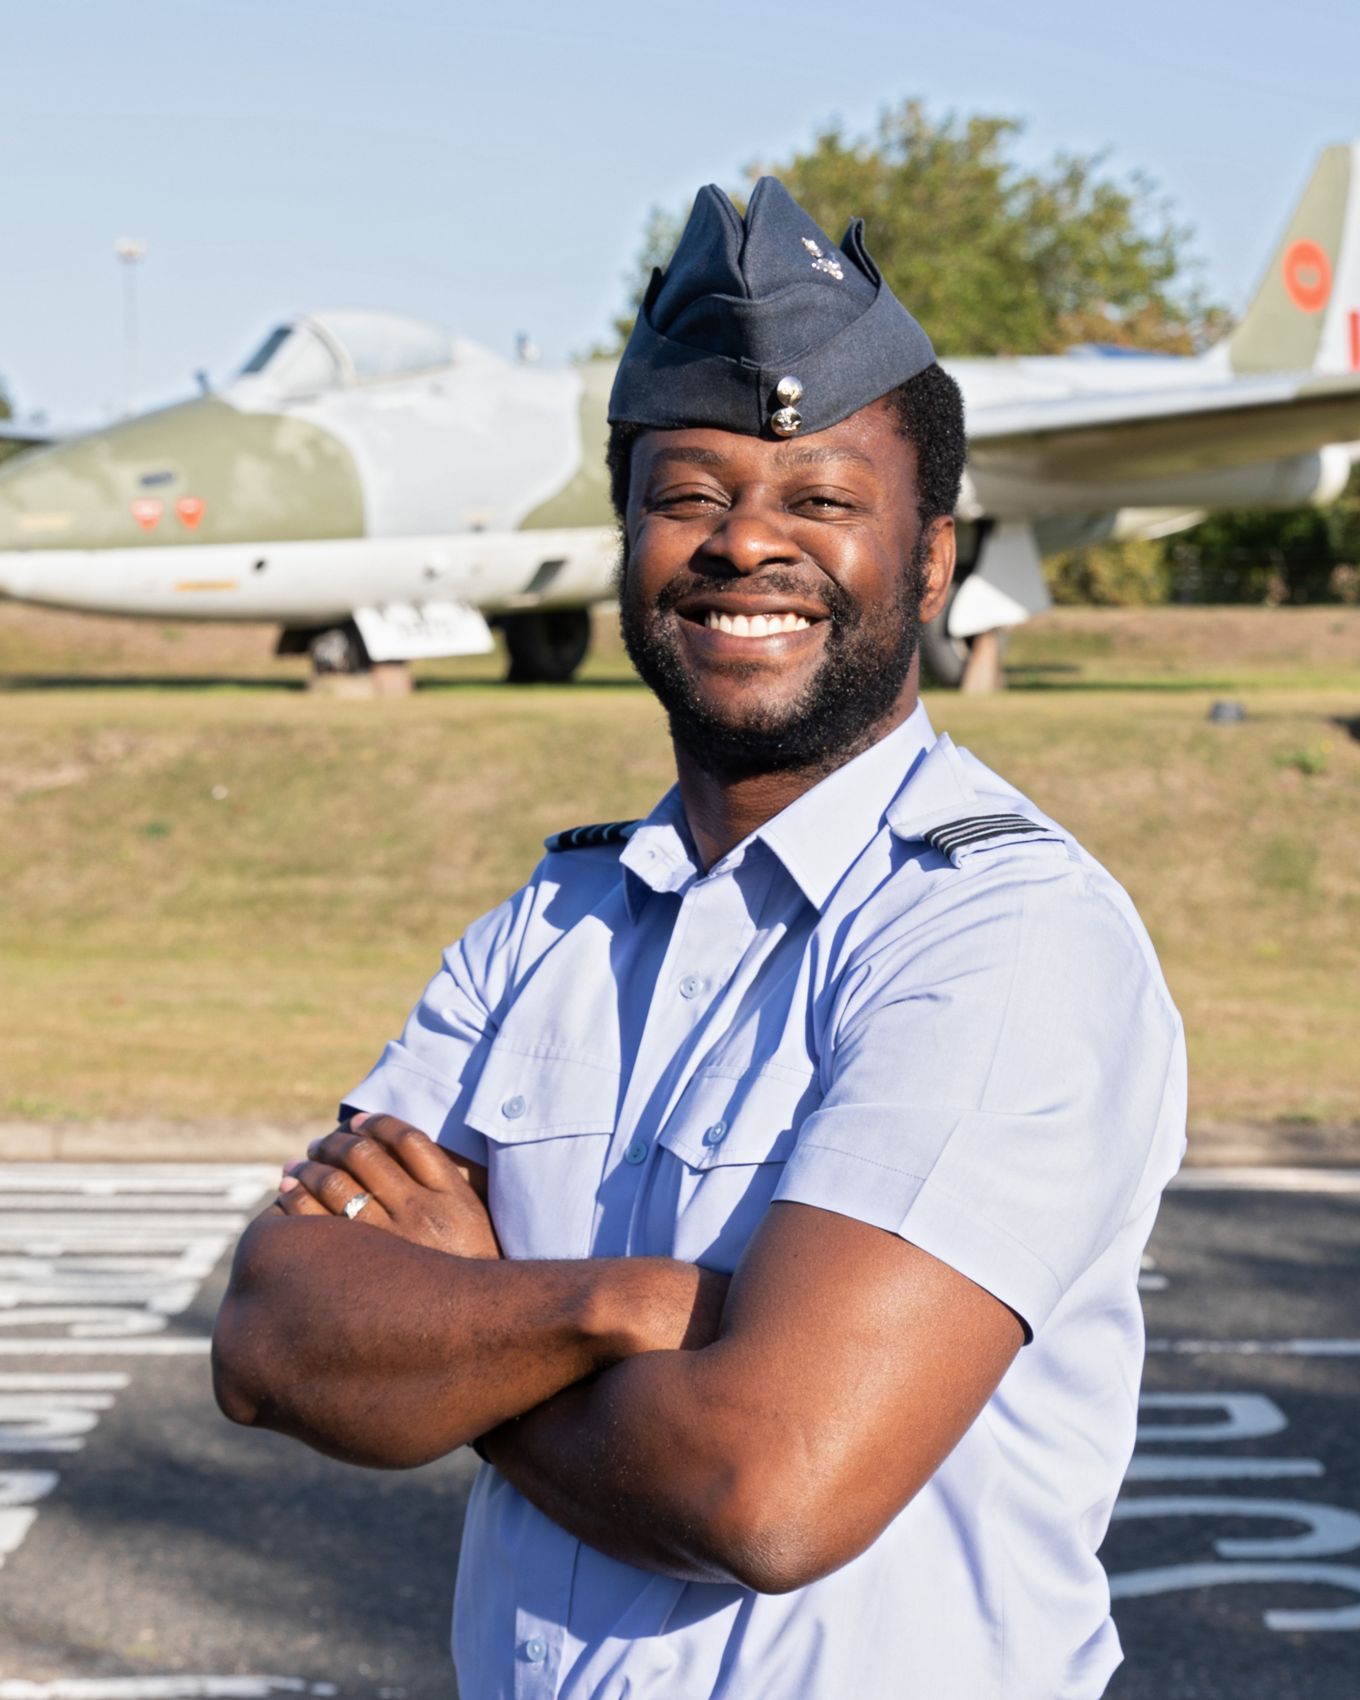 Squadron Leader Kyle Roachford in 2019 (supplied image).